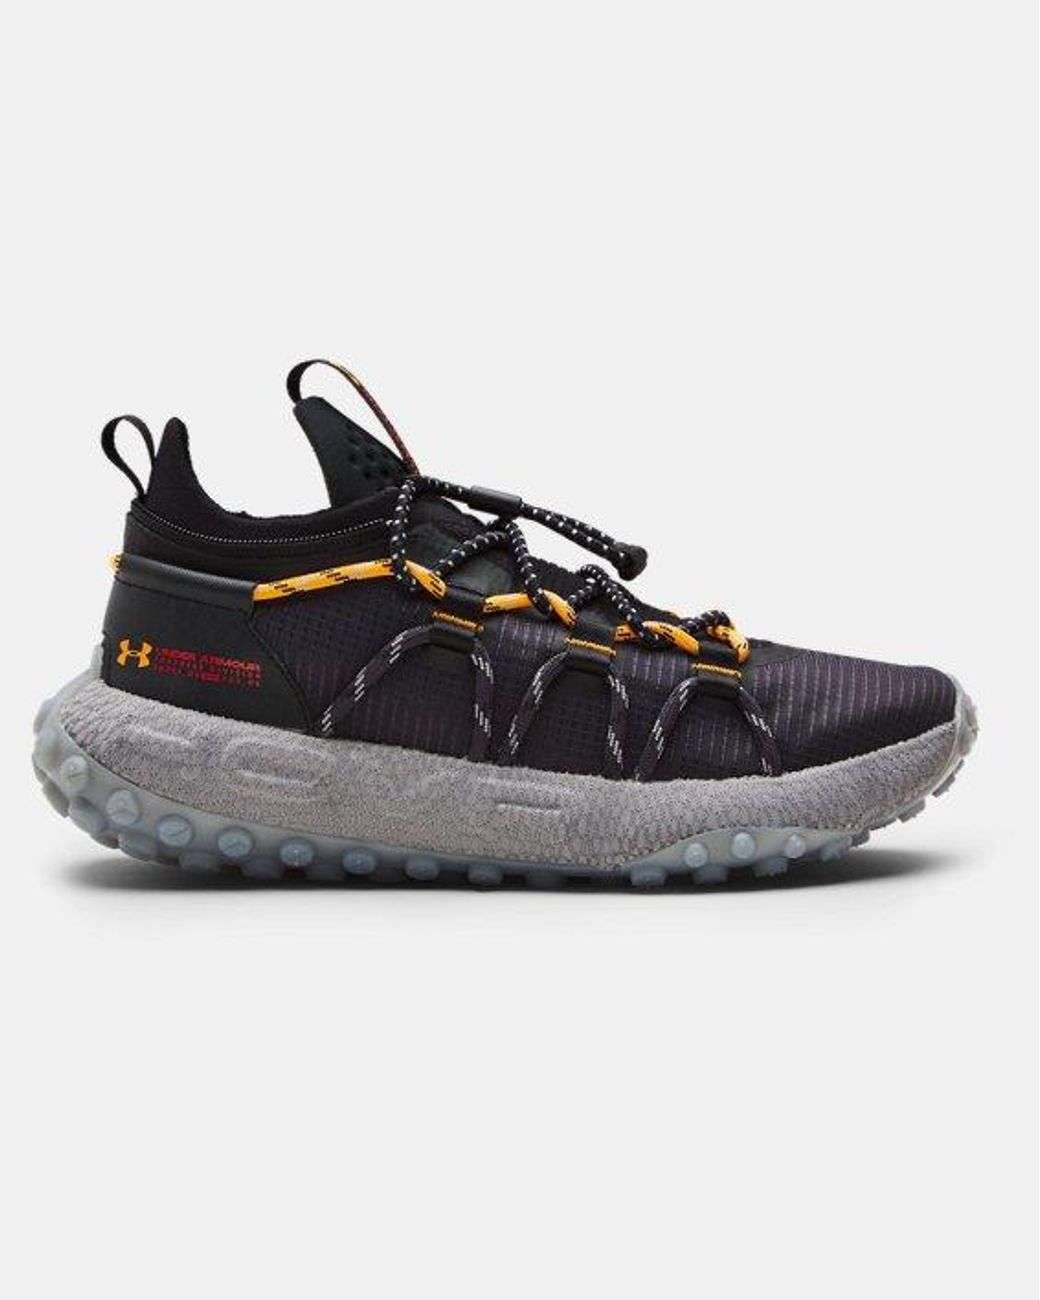 Under Armour Unisex Ua Hovr Summit Fat Tire Sportstyle Shoes in Purple ...